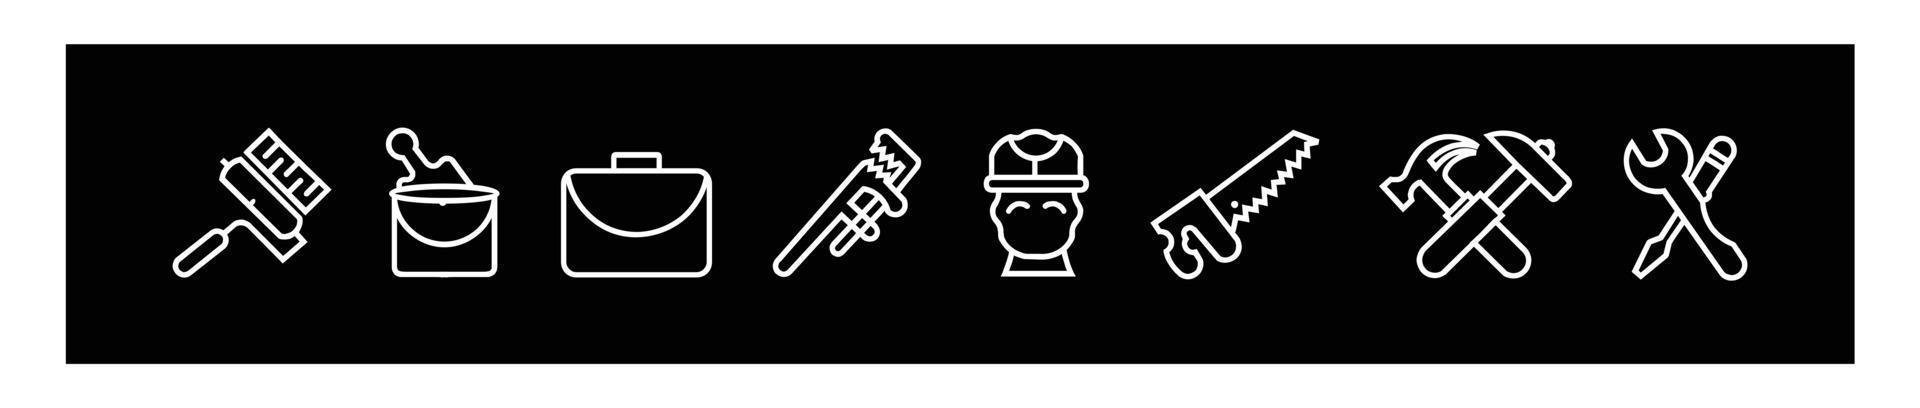 builder tools Construction site workflow and management  design icons,Machinery and building equipment outline line logo for design on black background. vector